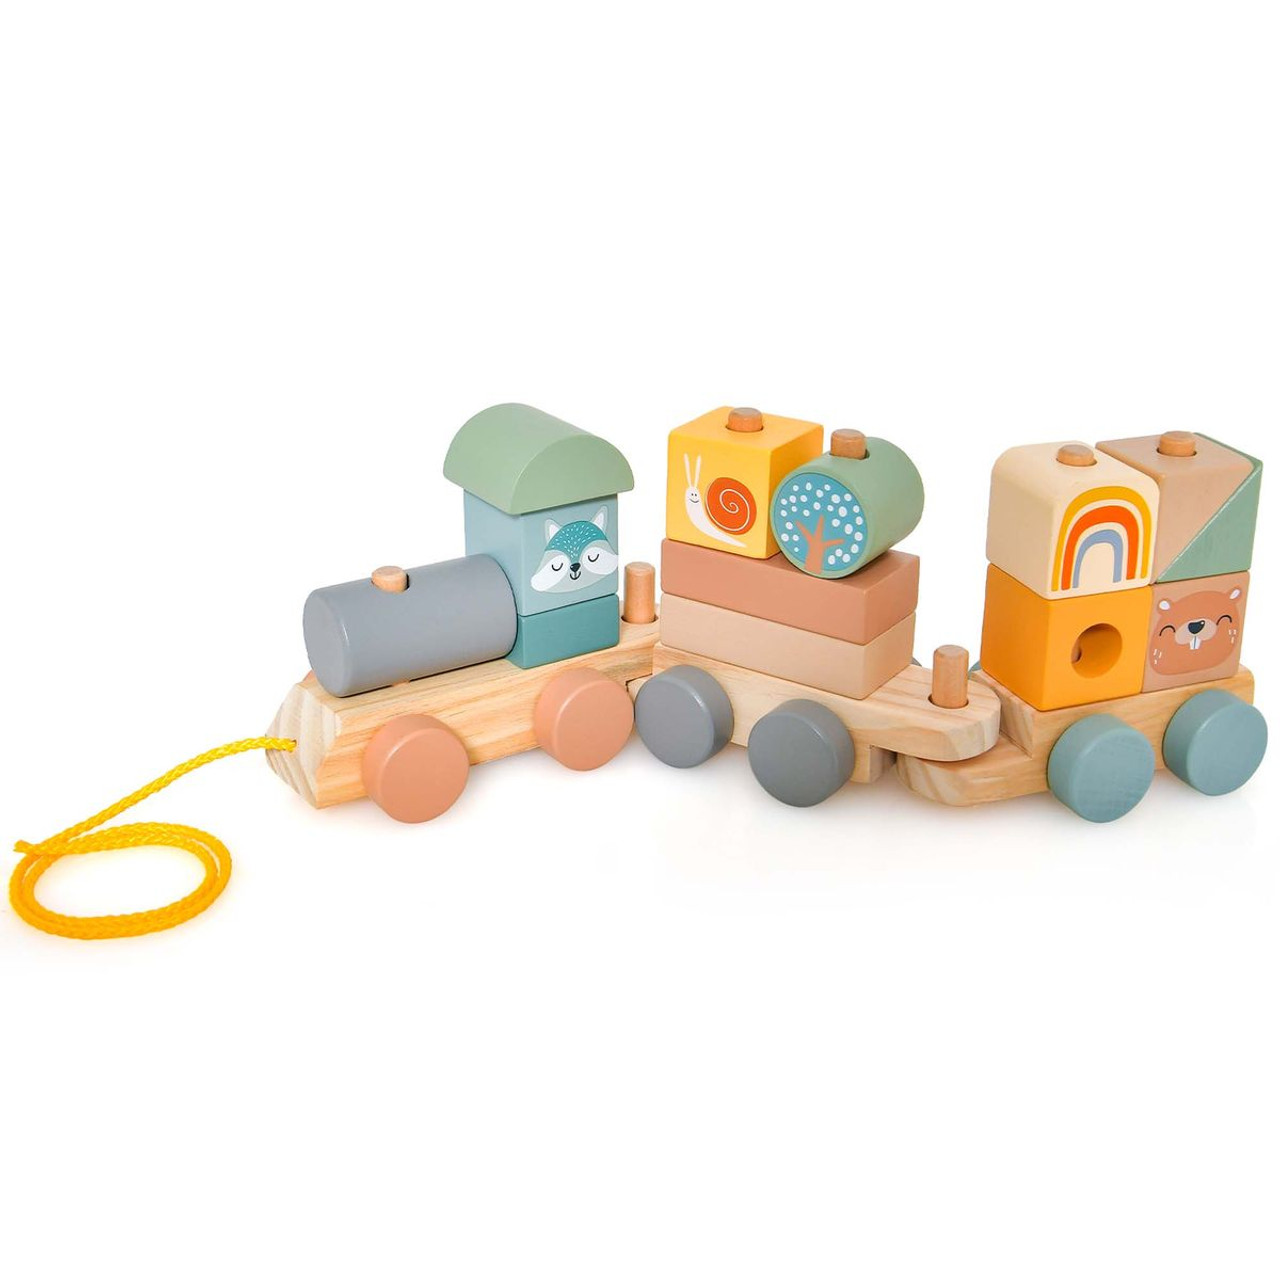 Toddler's Wooden Toy Train Set with Stacking Blocks product image